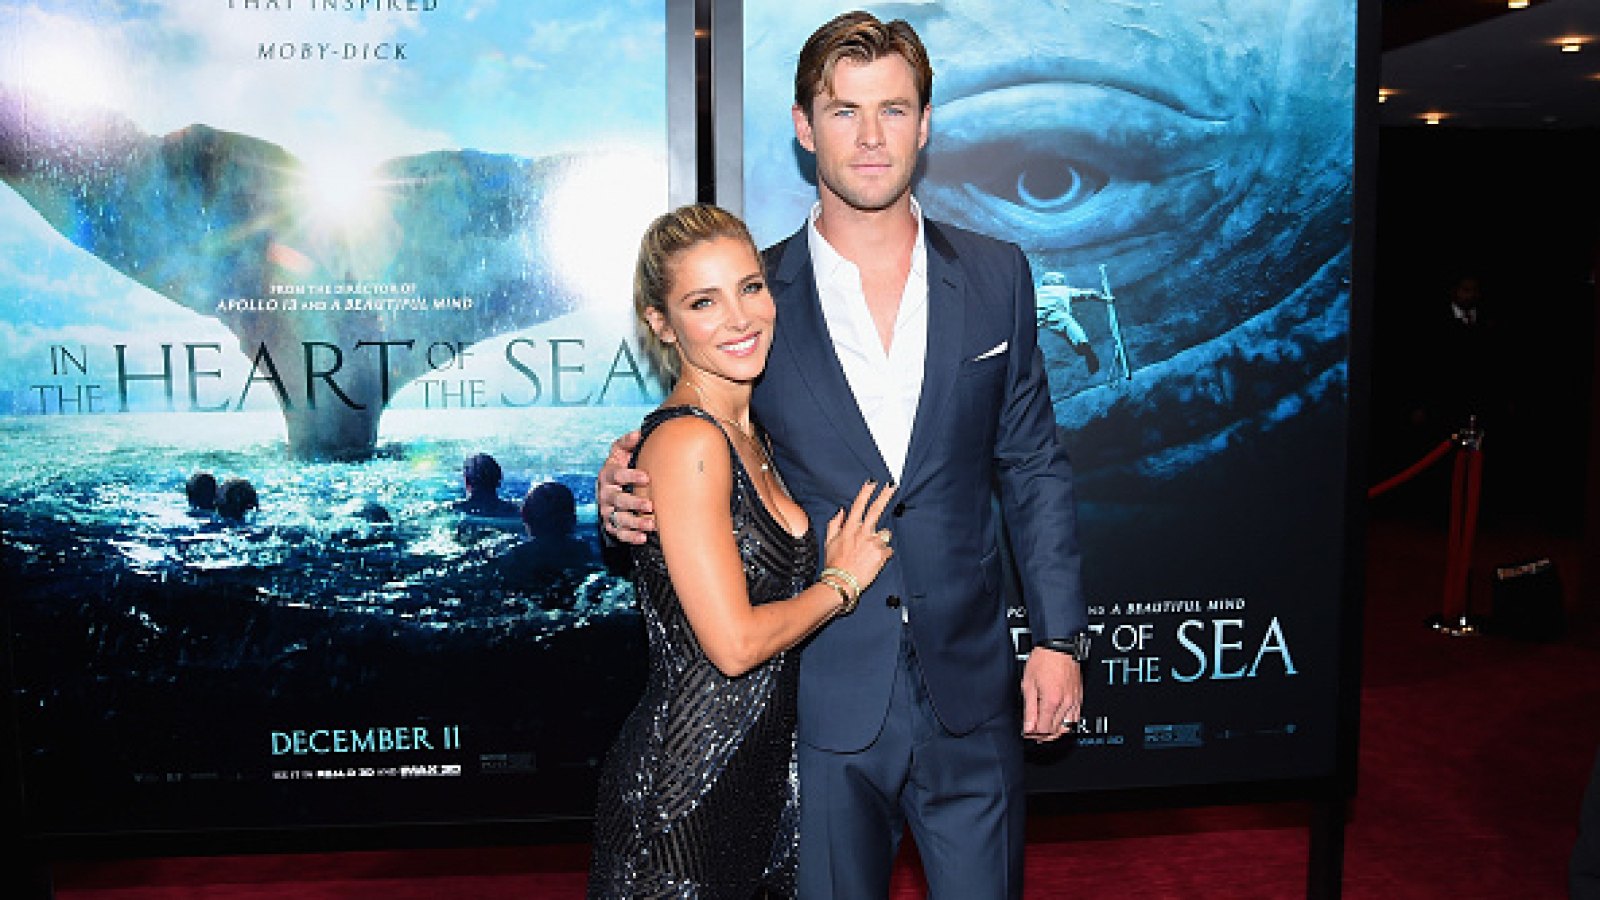 Elsa Pataky and Chris Hemsworth respond to rumors their marriage is in trouble